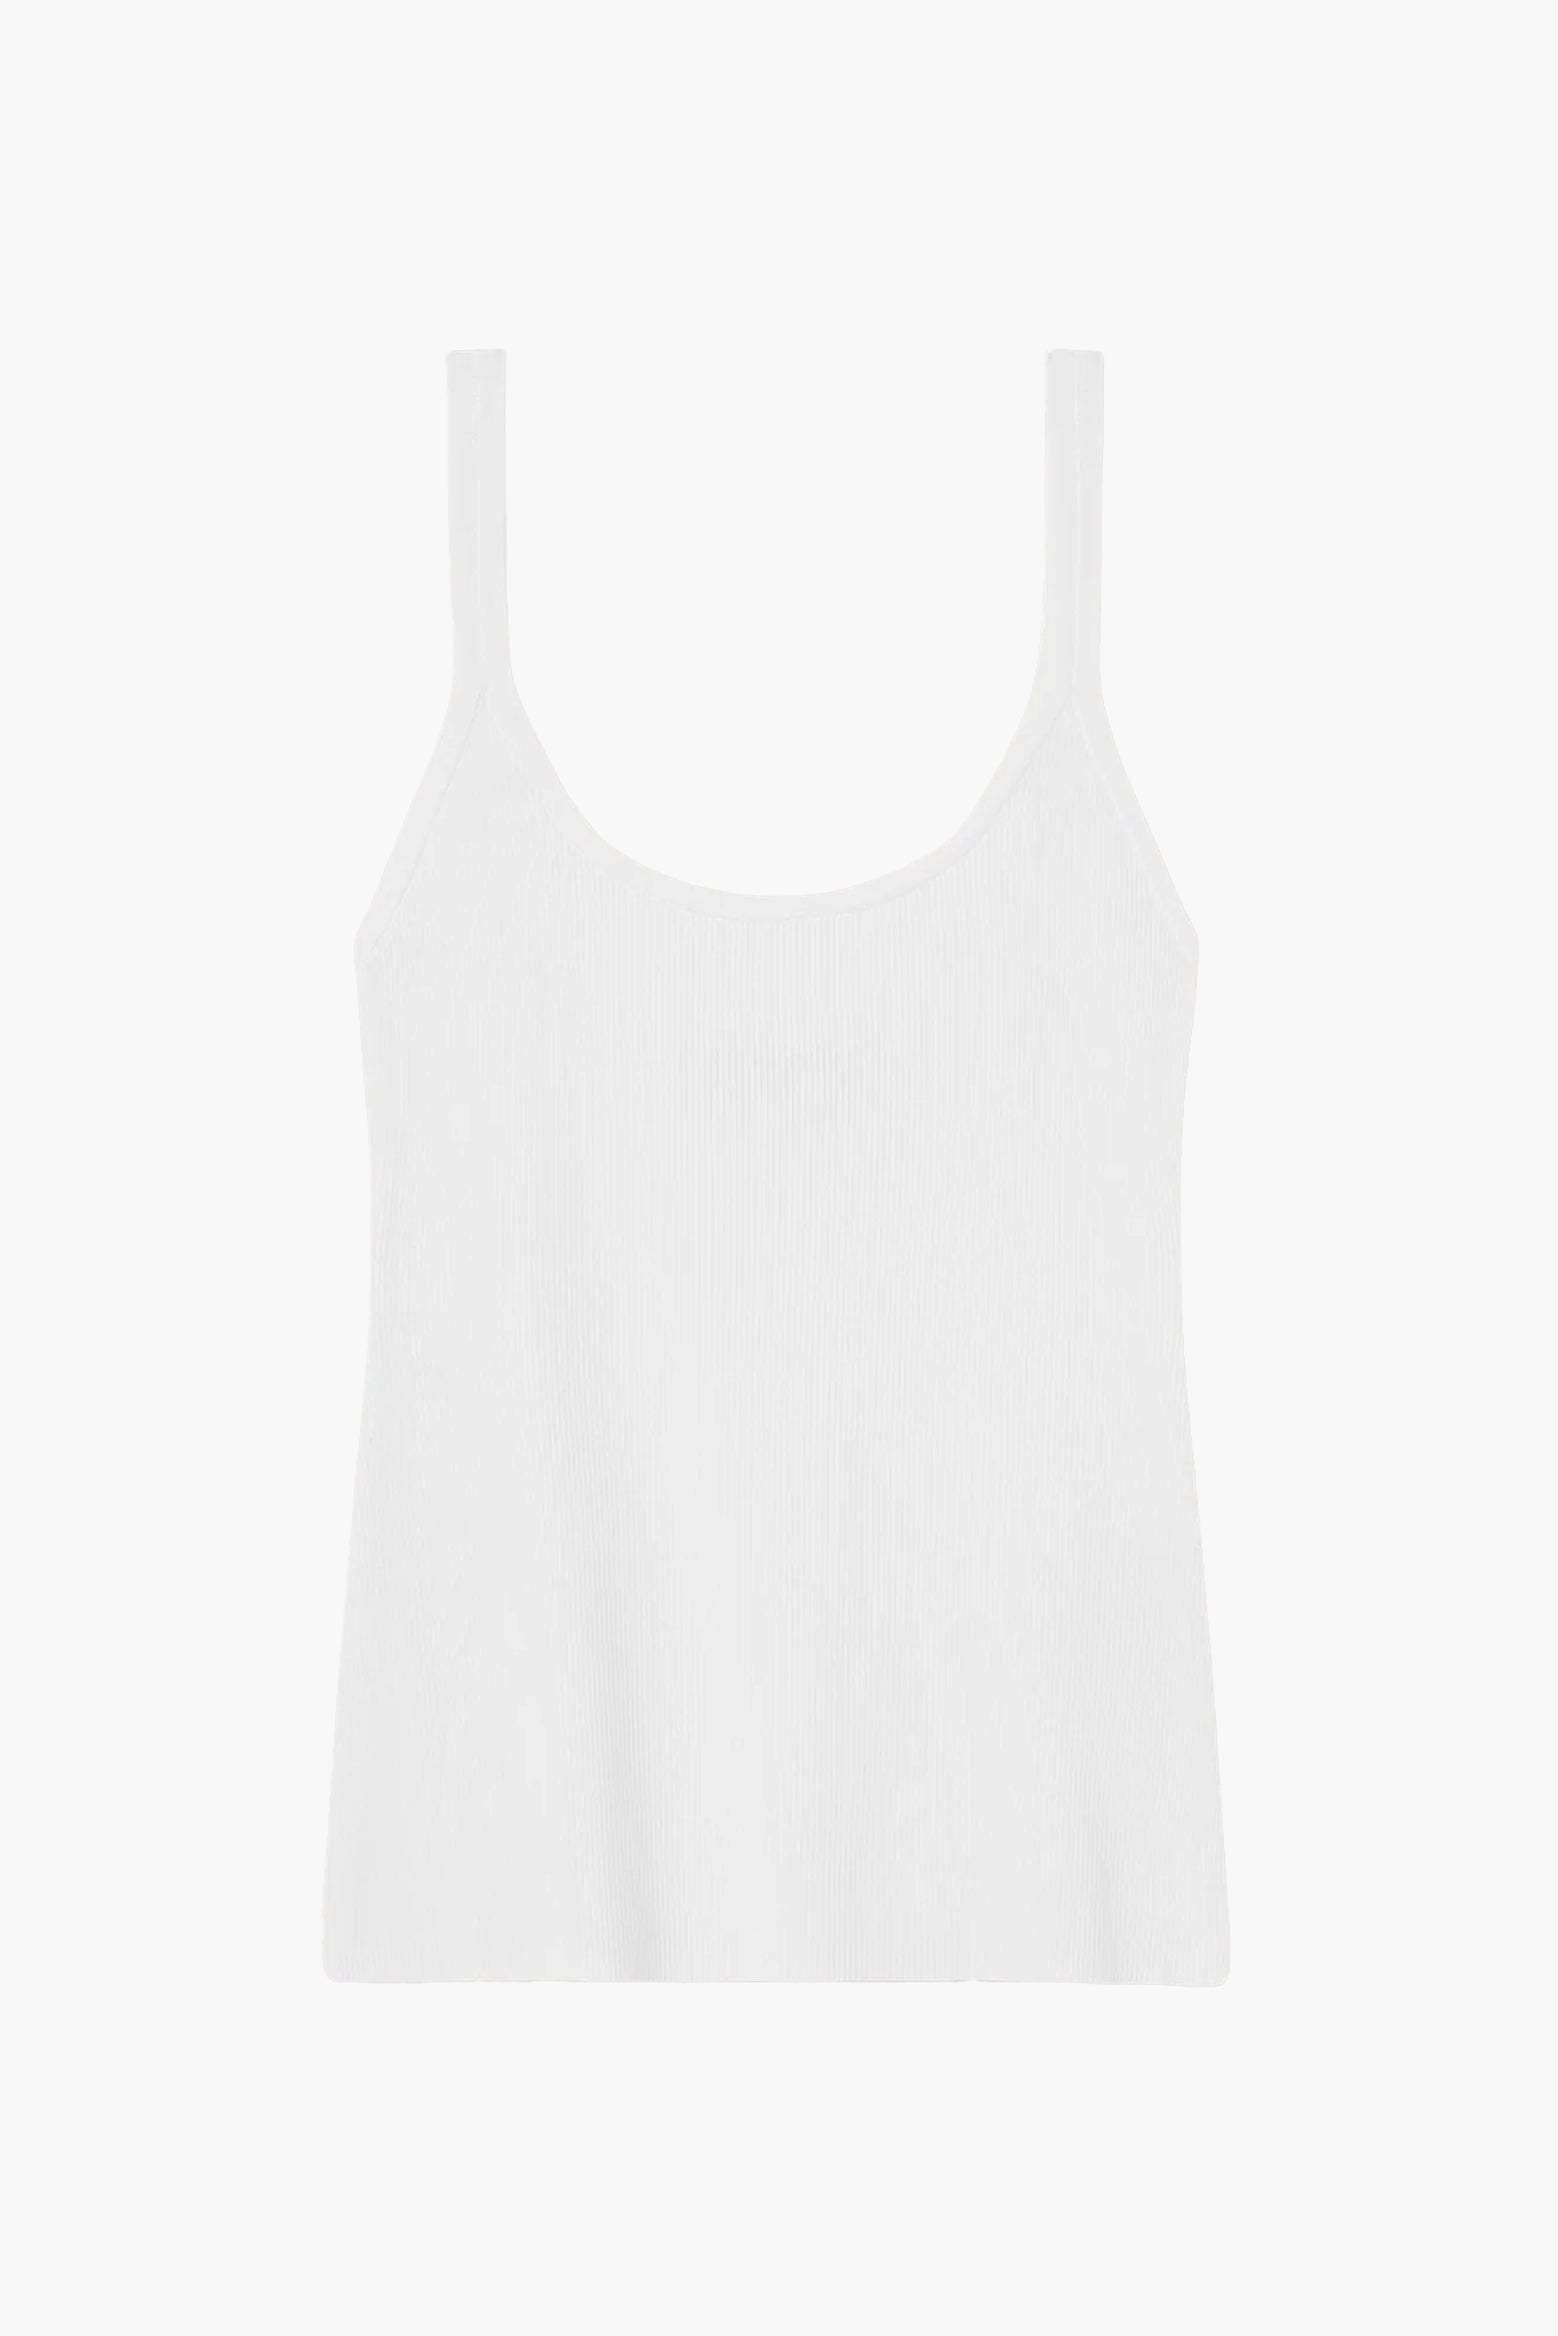 A.Emery Verna Tank in Parchment available at The New Trend Australia.